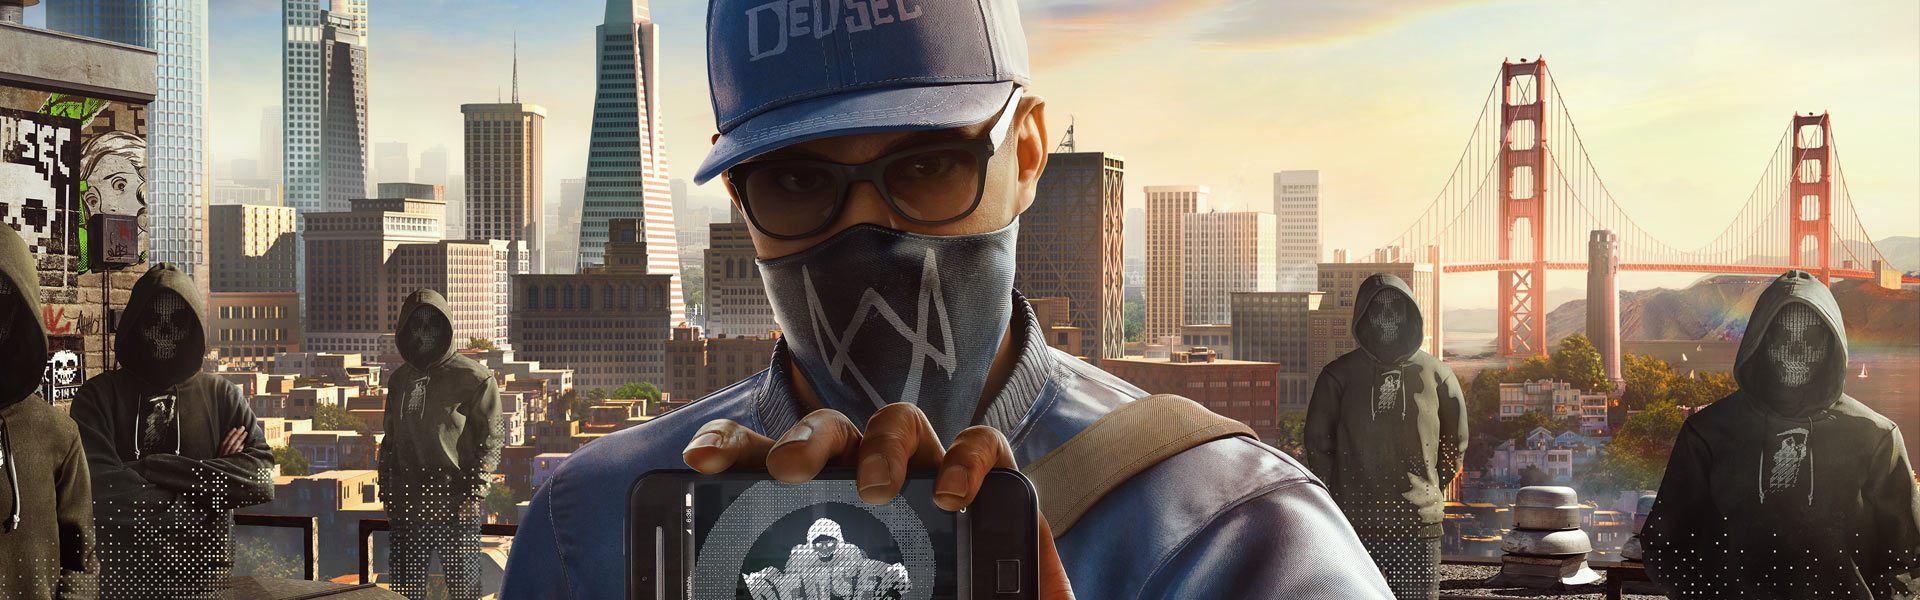 how to download watch dogs 2 on vita